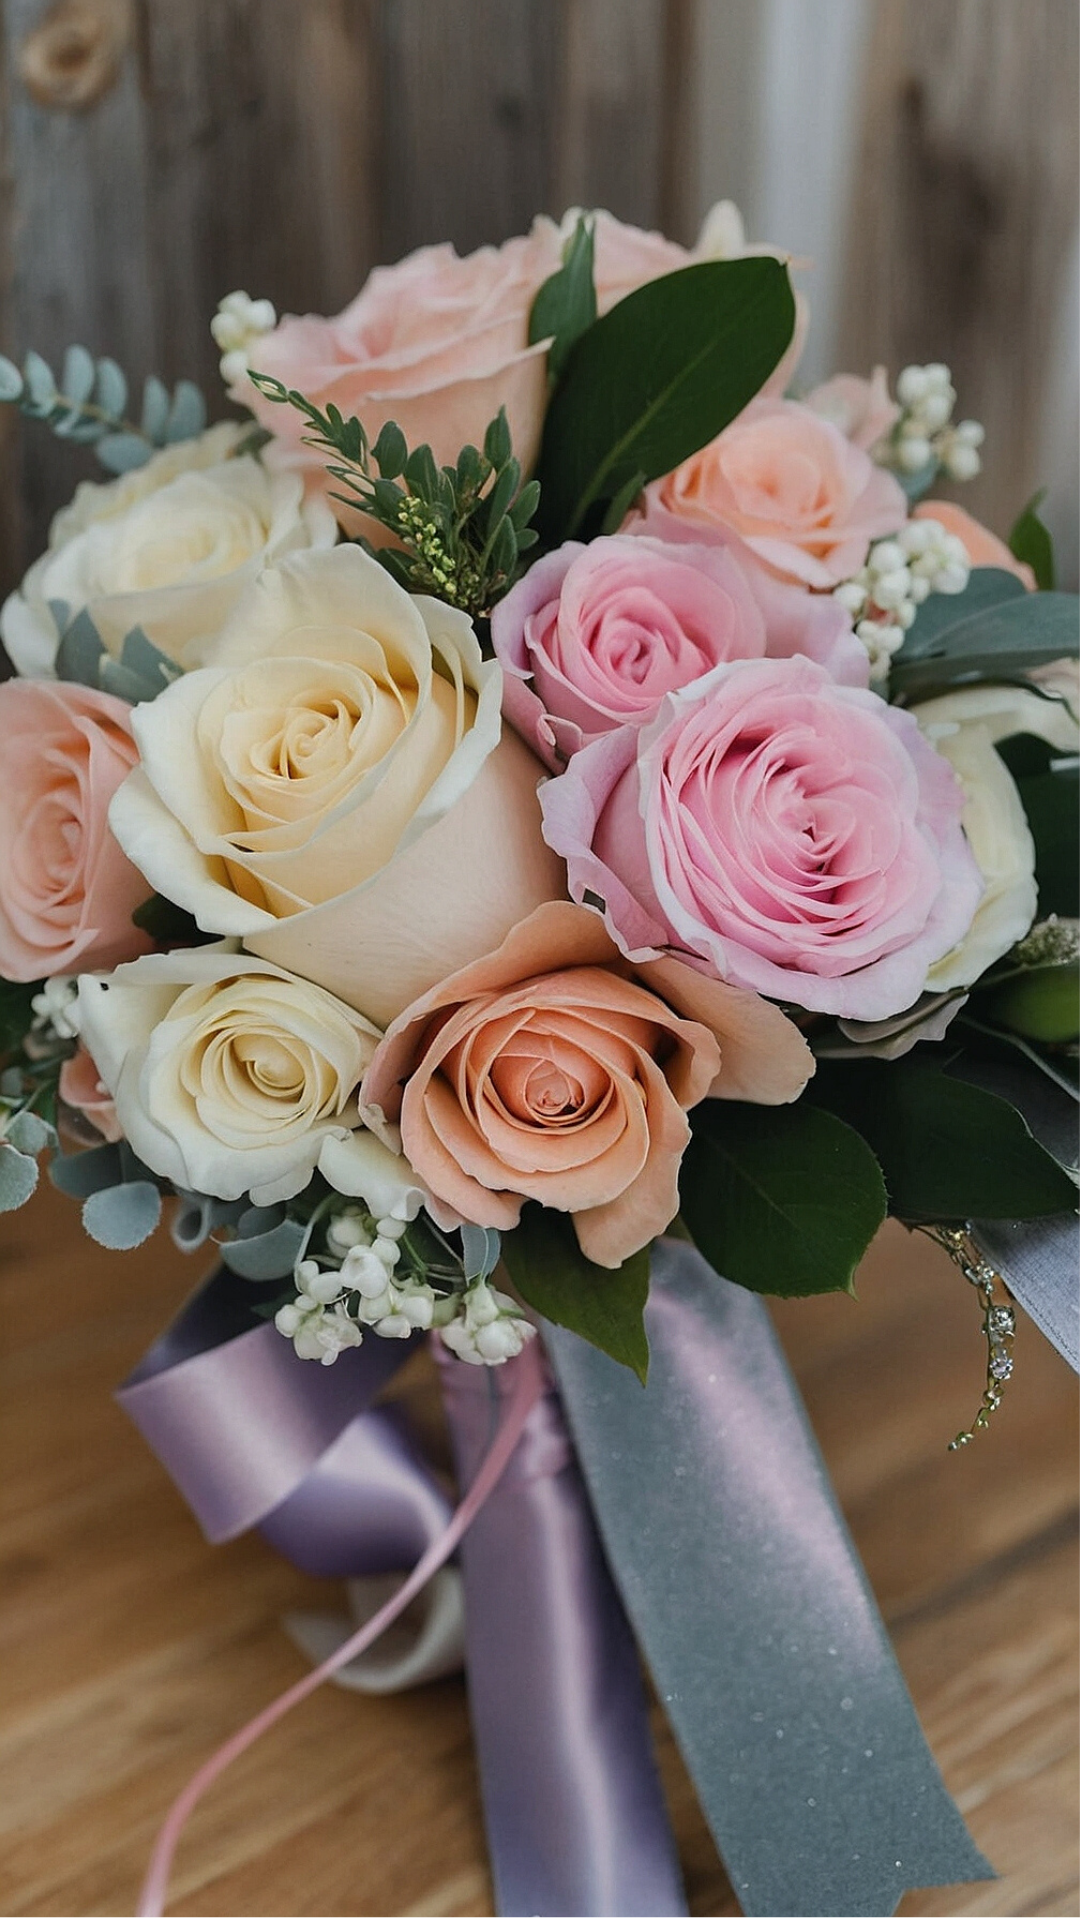 Sophisticated Prom Bouquet: Roses Galore 